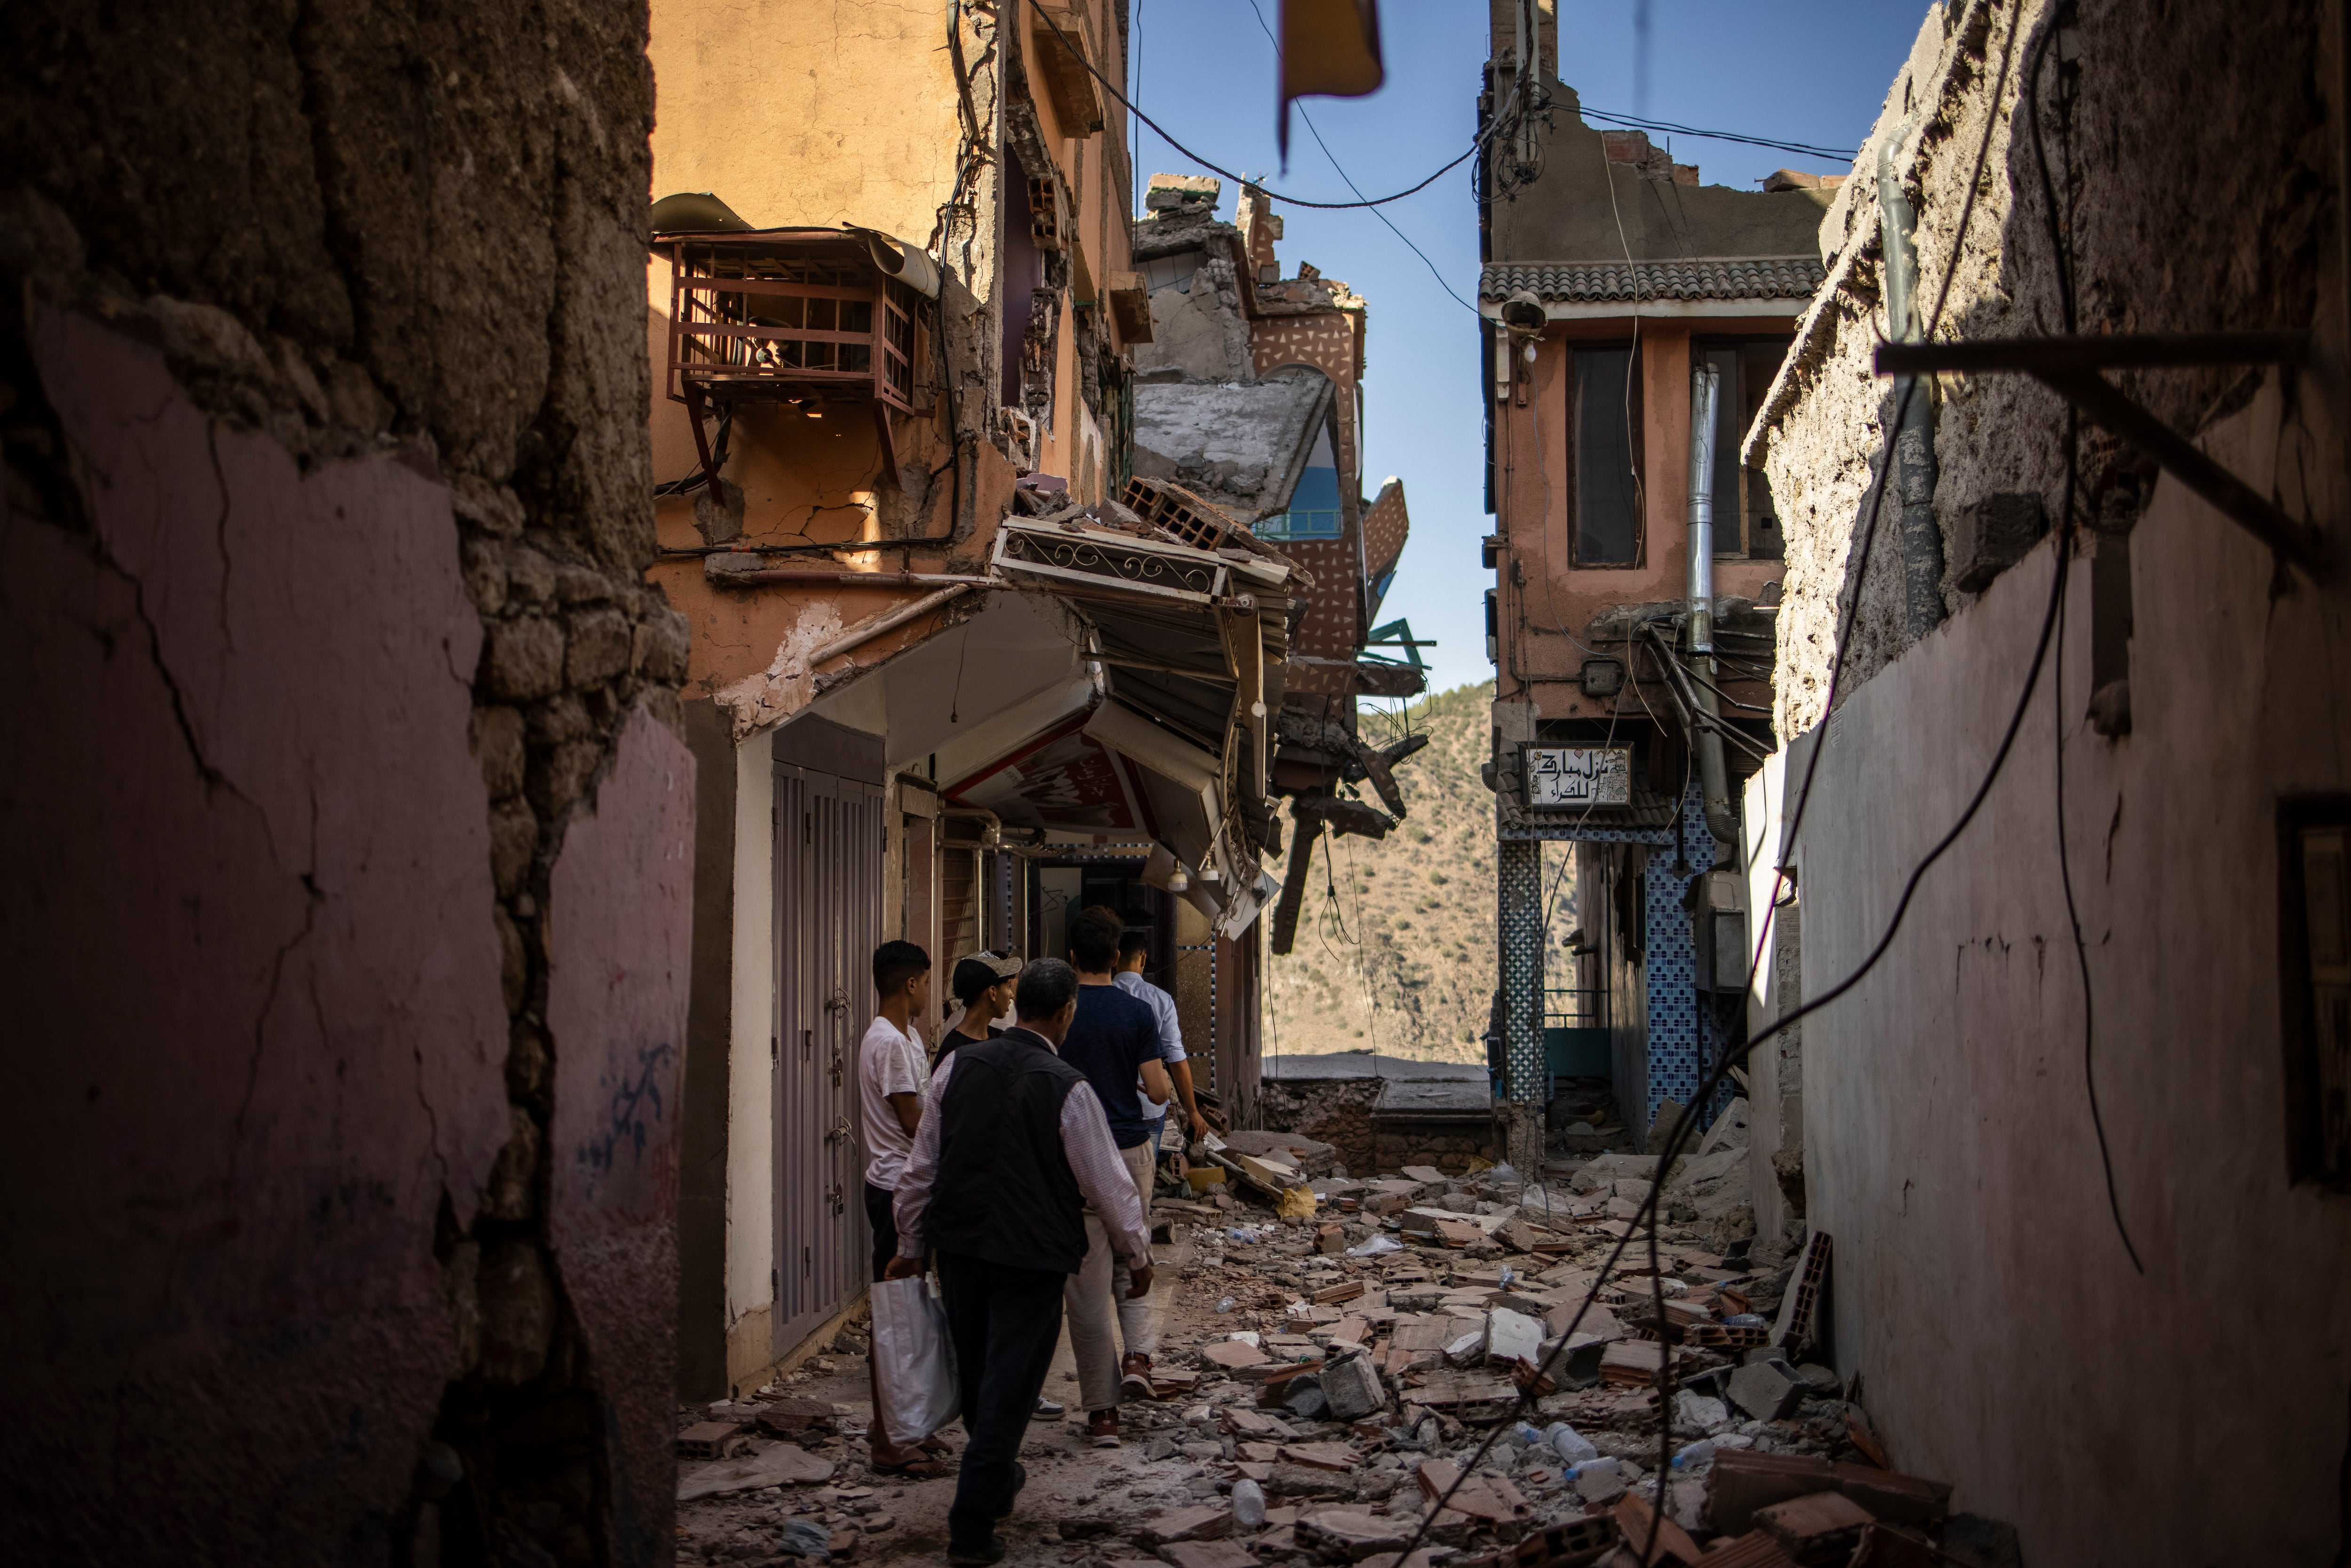 Moulay Brahim (Morocco), 11/09/2023.- People walk between damaged buildings following a powerful earthquake, in Moulay Brahim, south of Marrakesh, Morocco, 11 September 2023. The magnitude 6.8 earthquake that struck central Morocco late 08 September has killed more than 2,450 people and injured around 2,500 others, damaging buildings from villages and towns in the Atlas Mountains to Marrakesh, according to a report released by the country's Interior Ministry. The earthquake has affected more than 300,000 people in Marrakesh and its outskirts, the UN Office for the Coordination of Humanitarian Affairs (OCHA) said. Morocco's King Mohammed VI on 09 September declared a three-day national mourning for the victims of the earthquake. (Terremoto/sismo, Marruecos) EFE/EPA/YOAN VALAT
